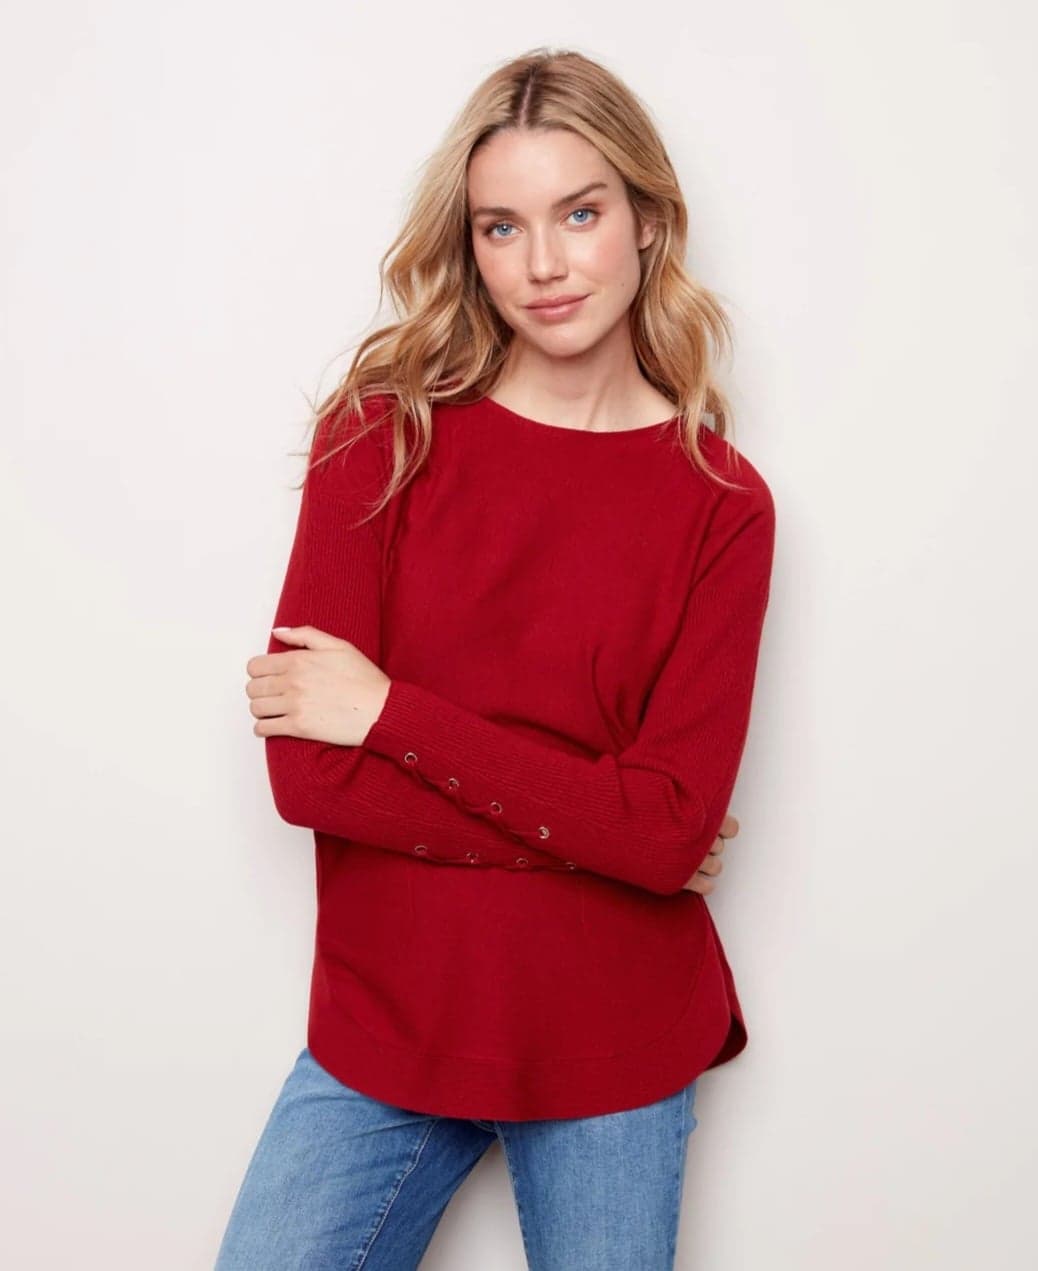 Charlie B Lace Up Cuff Detail Scarlet Red Sweater- Clearance Final Sale